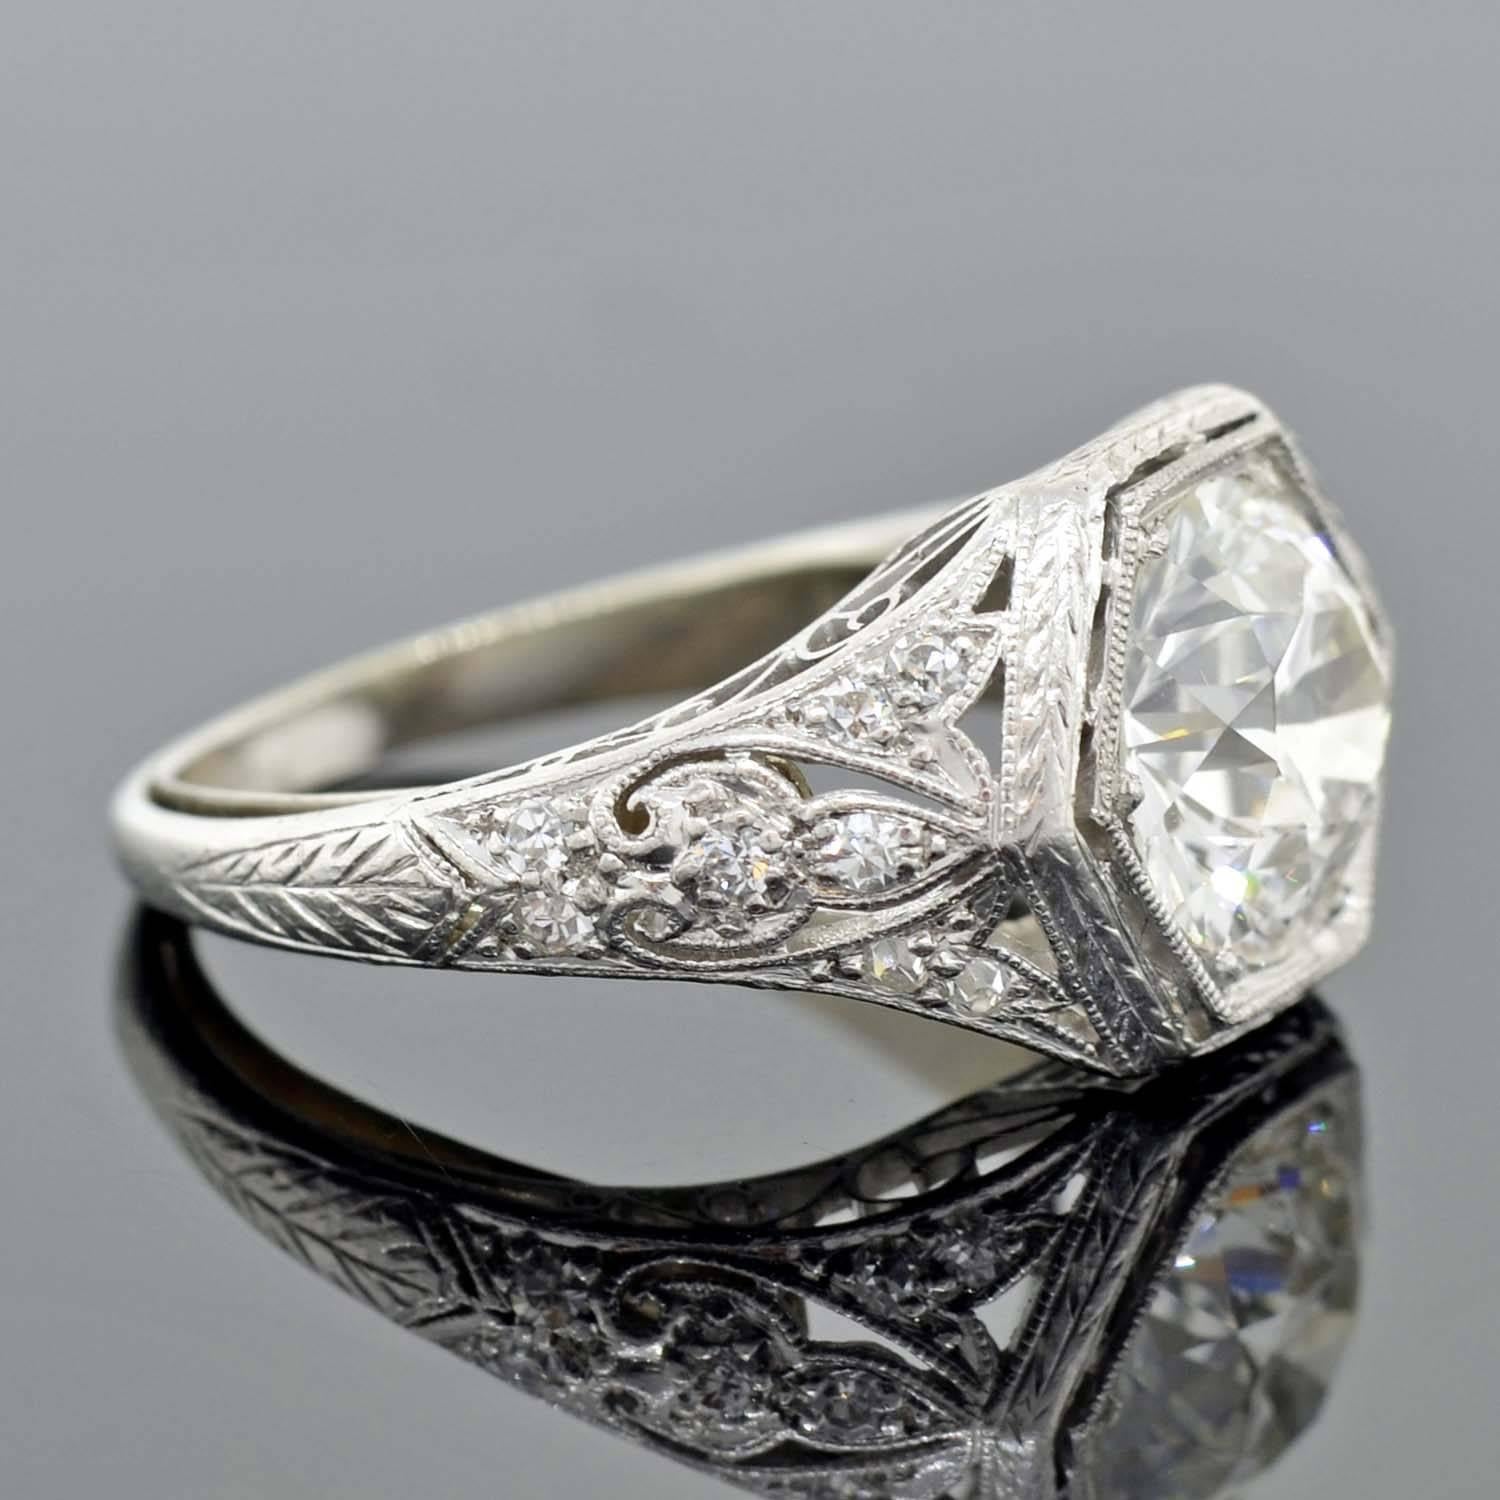 

An absolutely stunning diamond engagement ring from the Art Deco (ca1920) era! This beautiful piece is made of platinum and features a substantial old European Cut diamond resting at the center of an intricate filigree wirework mounting. The